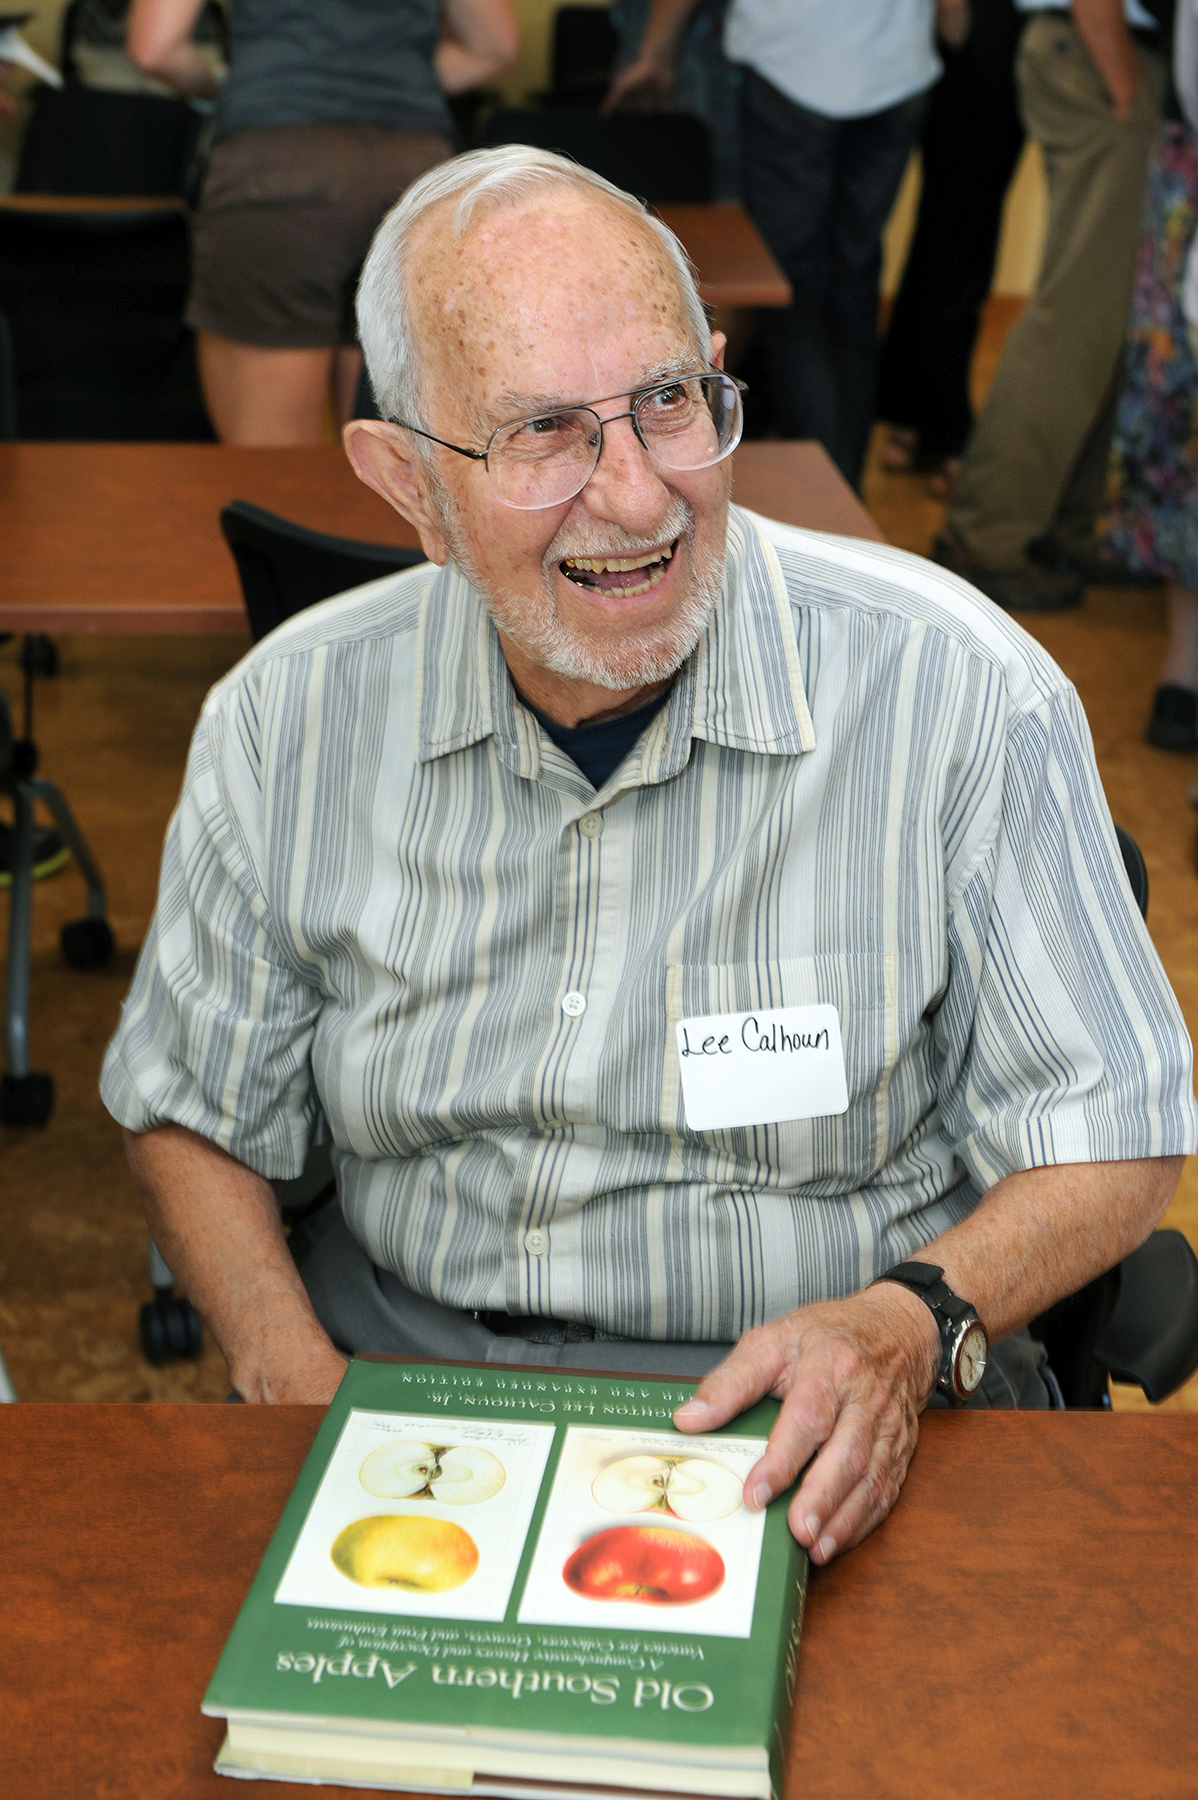 The honored guest at the celebration, Lee Calhoun, with his book on Southern apples. (photo by Donn Young)